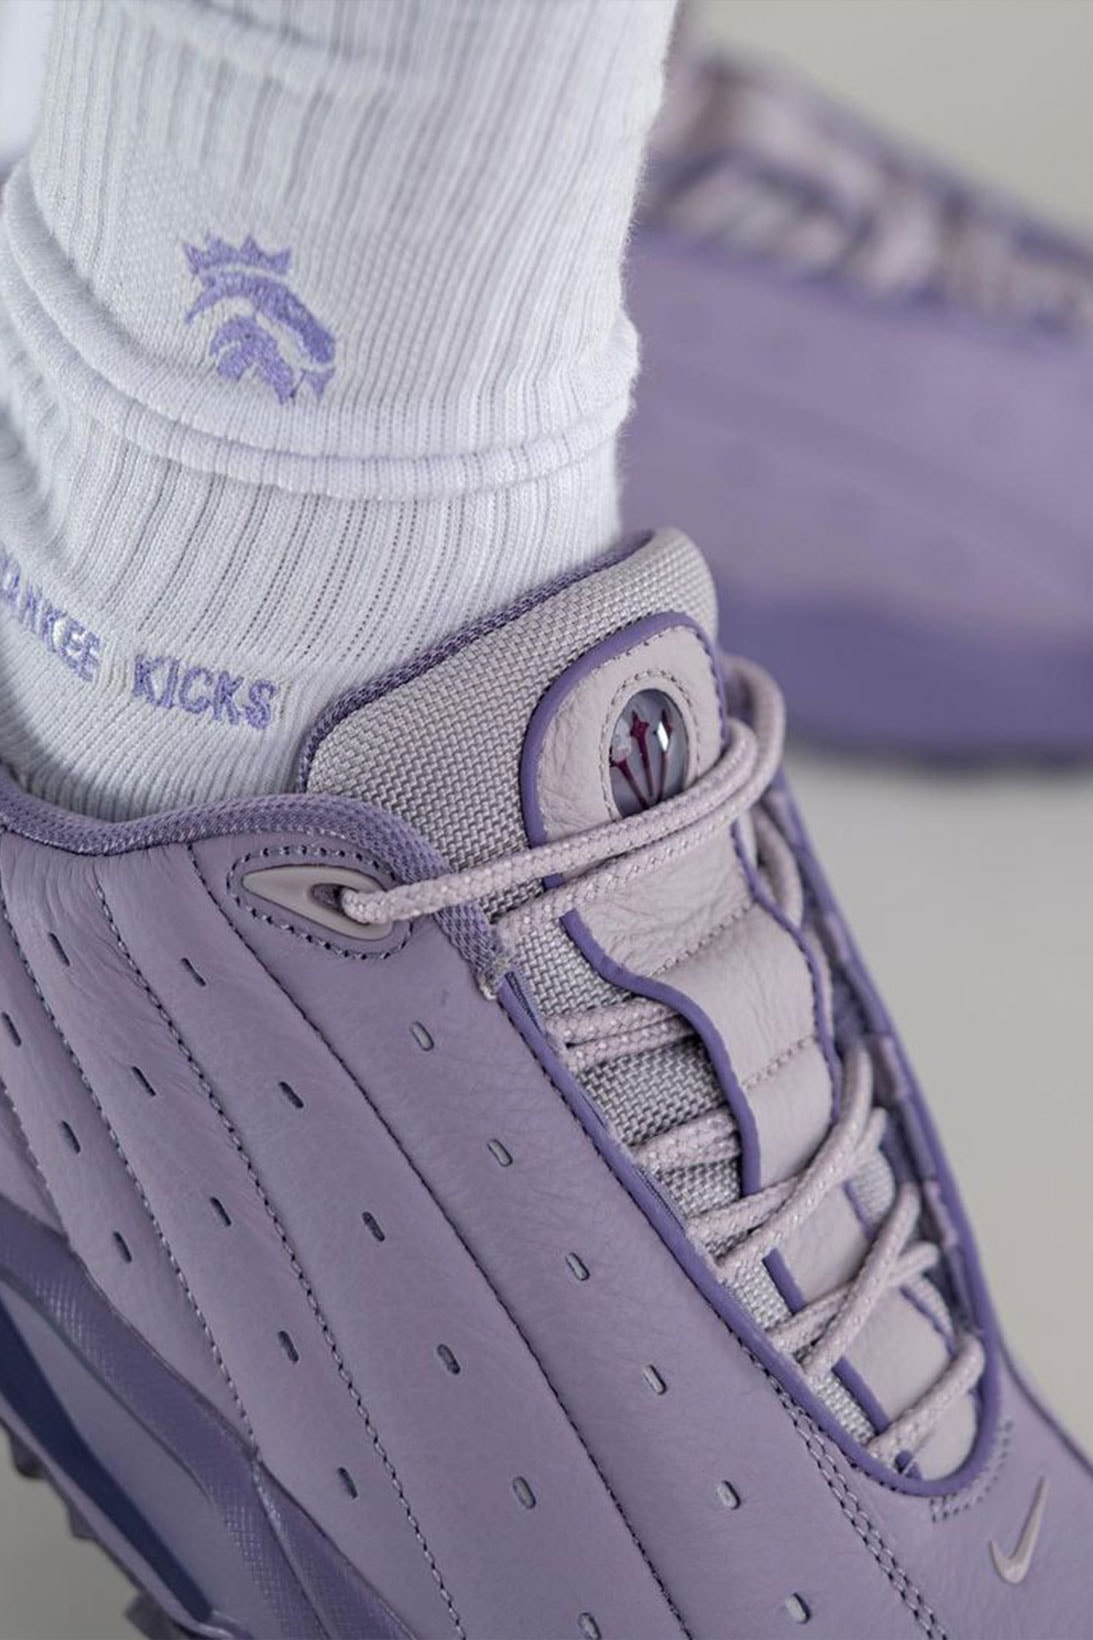 Drake NOCTA Nike Hot Step Air Terra Purple Lilac Colorway Release Images Info